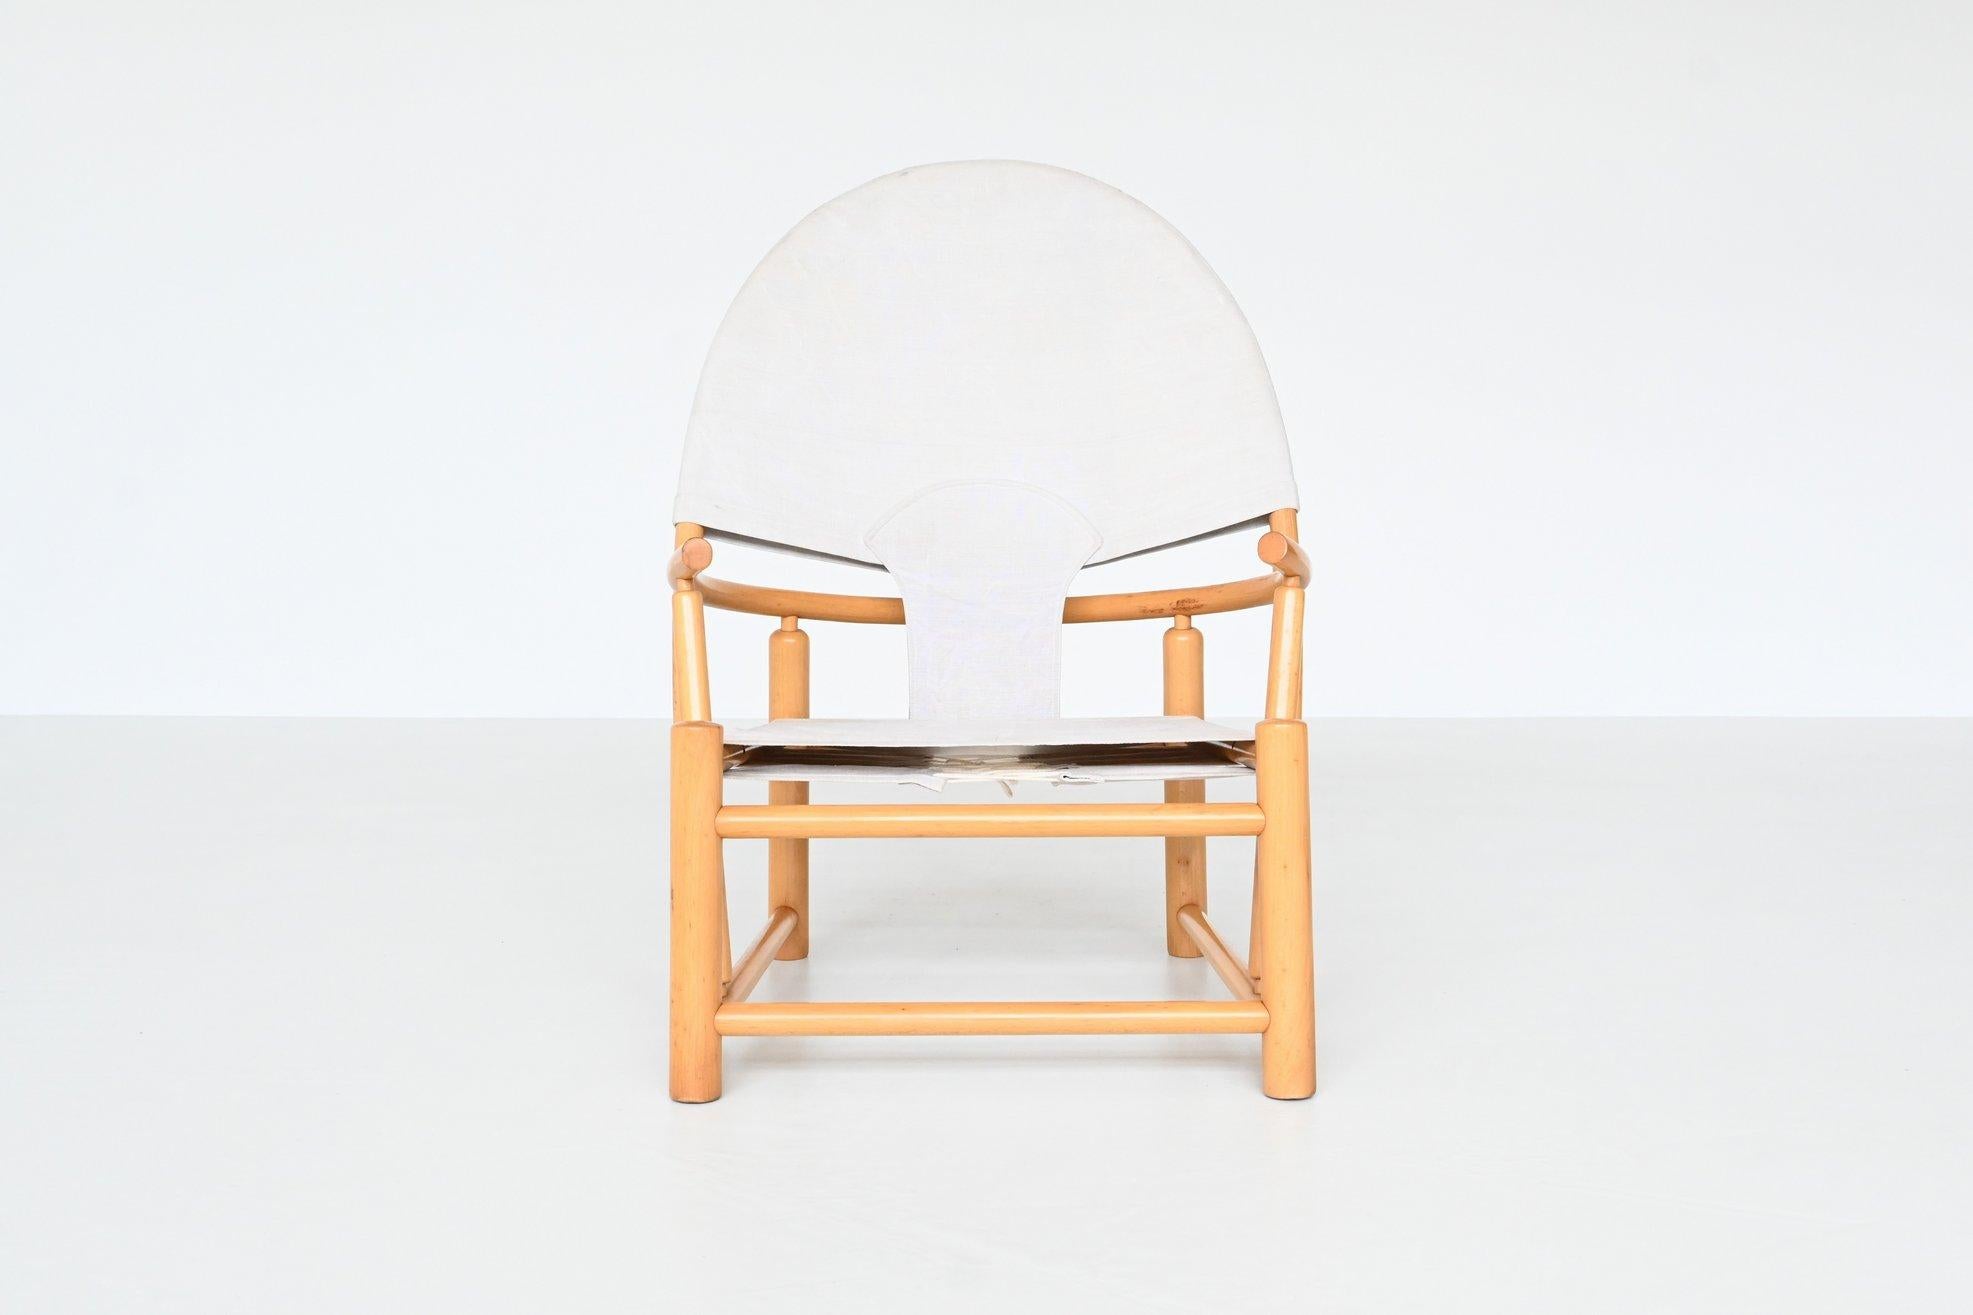 Beautiful shaped lounge chair model G23 Hoop chair designed by Piero Palange and Werther Toffoloni and manufactured by Germa, Italy 1972. This very nice chair features a solid bent beechwood frame with a canvas upholstery. It has a very nice hoop